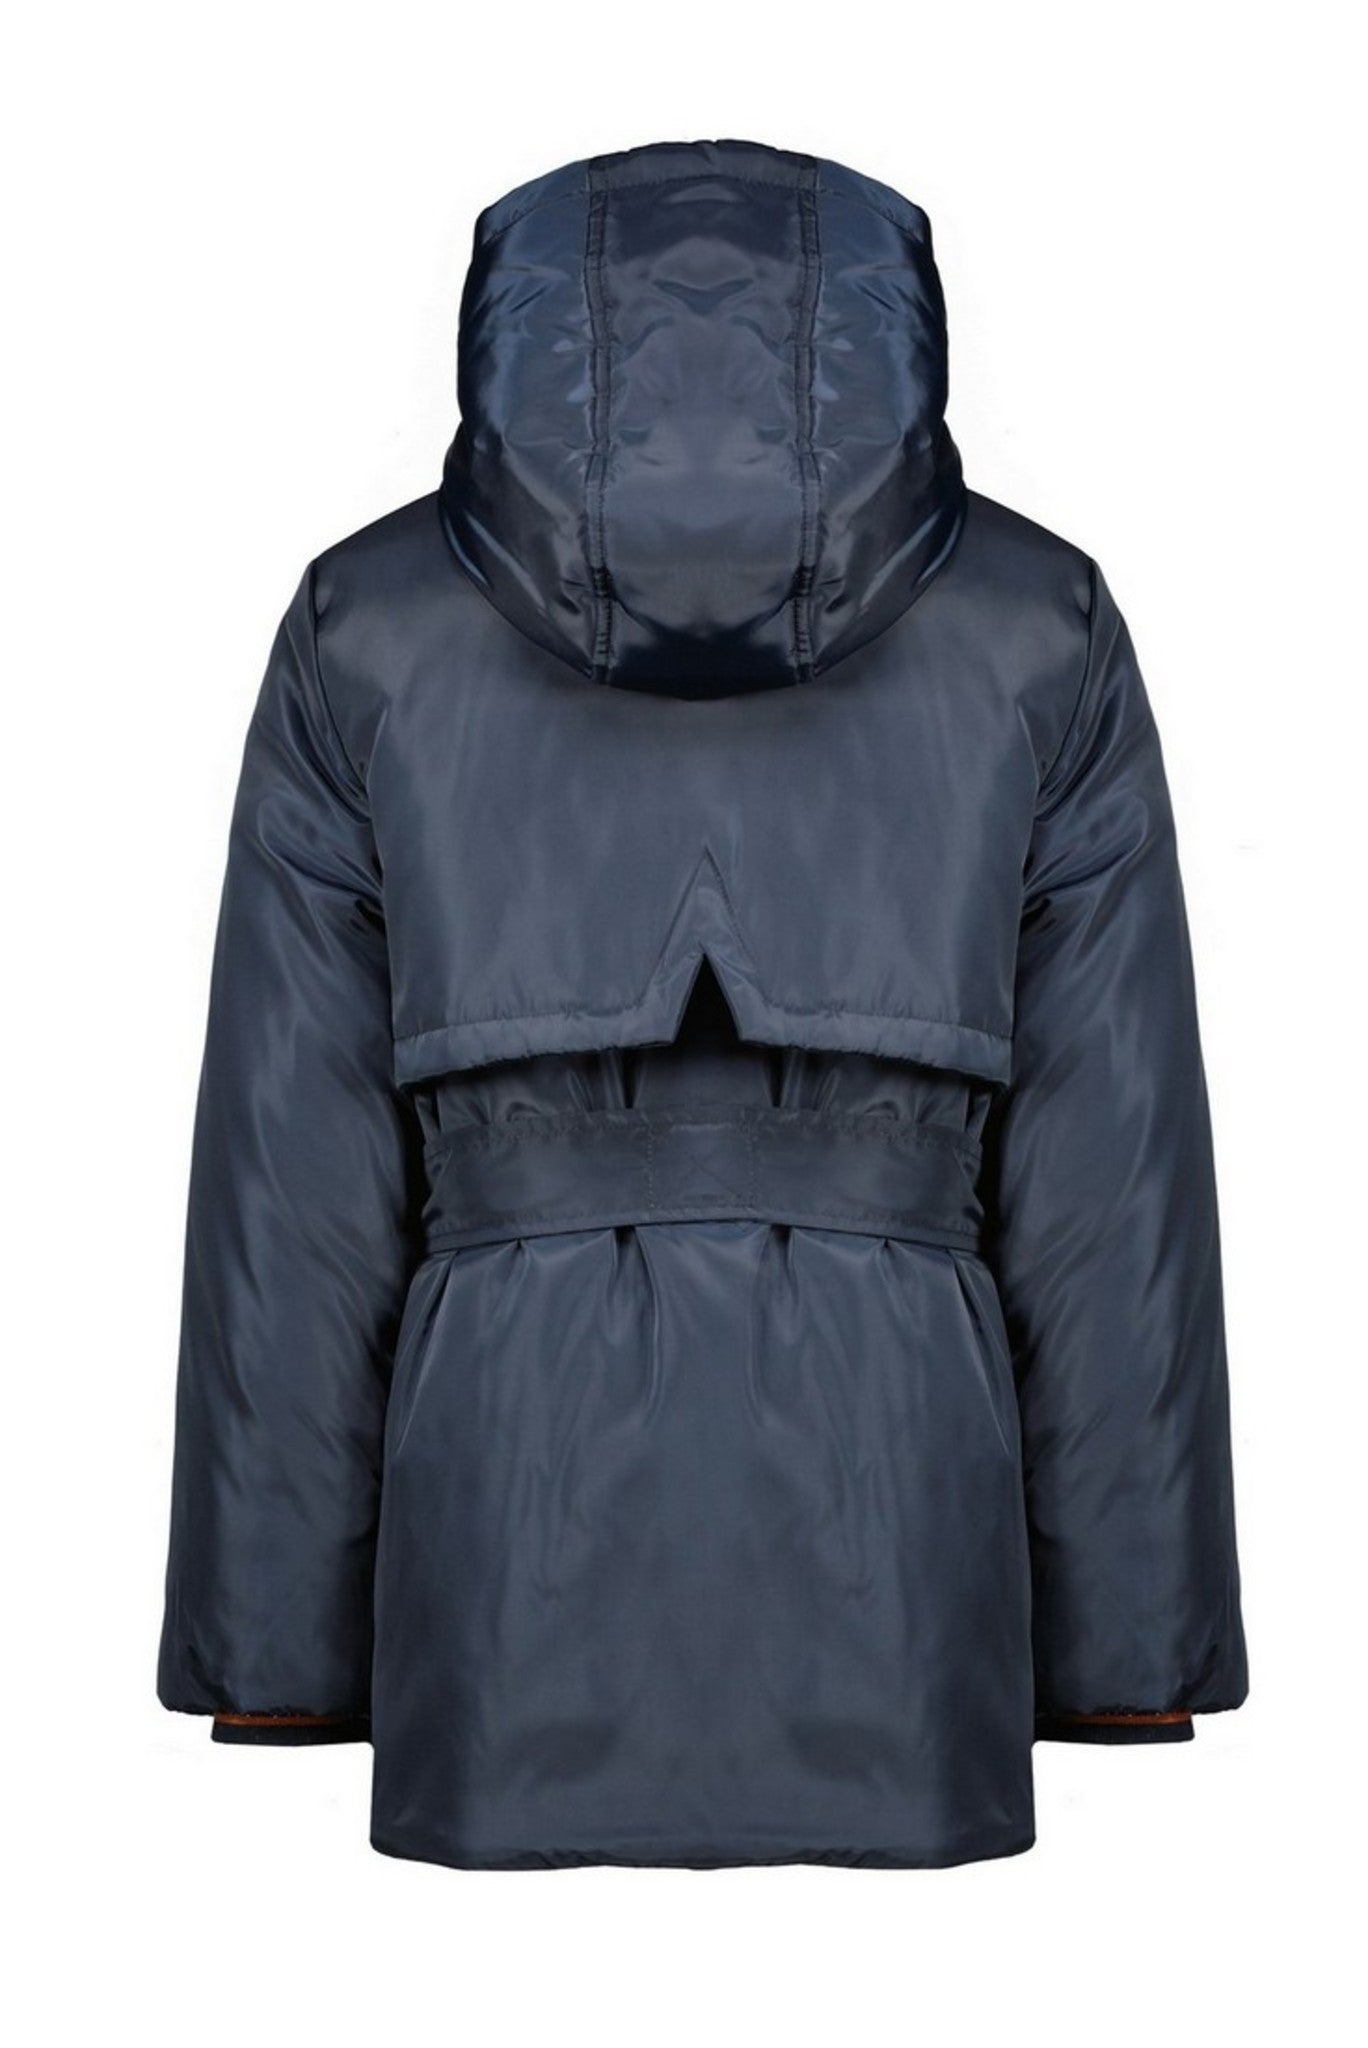 NONO - Bow hooded parka style jacket with little bag - Navy Blazer